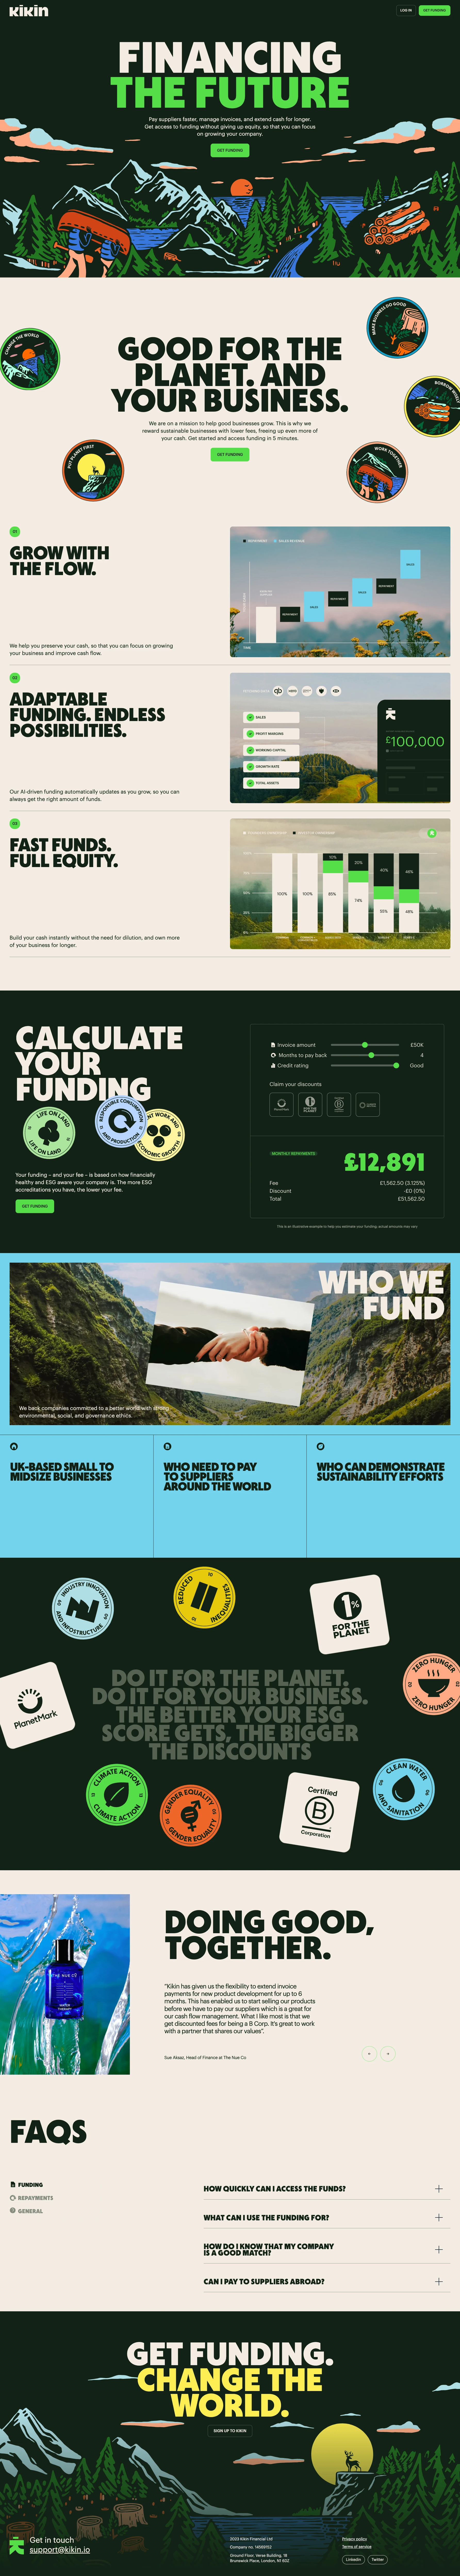 Kikin Landing Page Example: We put the planet and your invoices first. We pay supplier invoices so you can use the funds to grow. No equity dilution. No hassle.